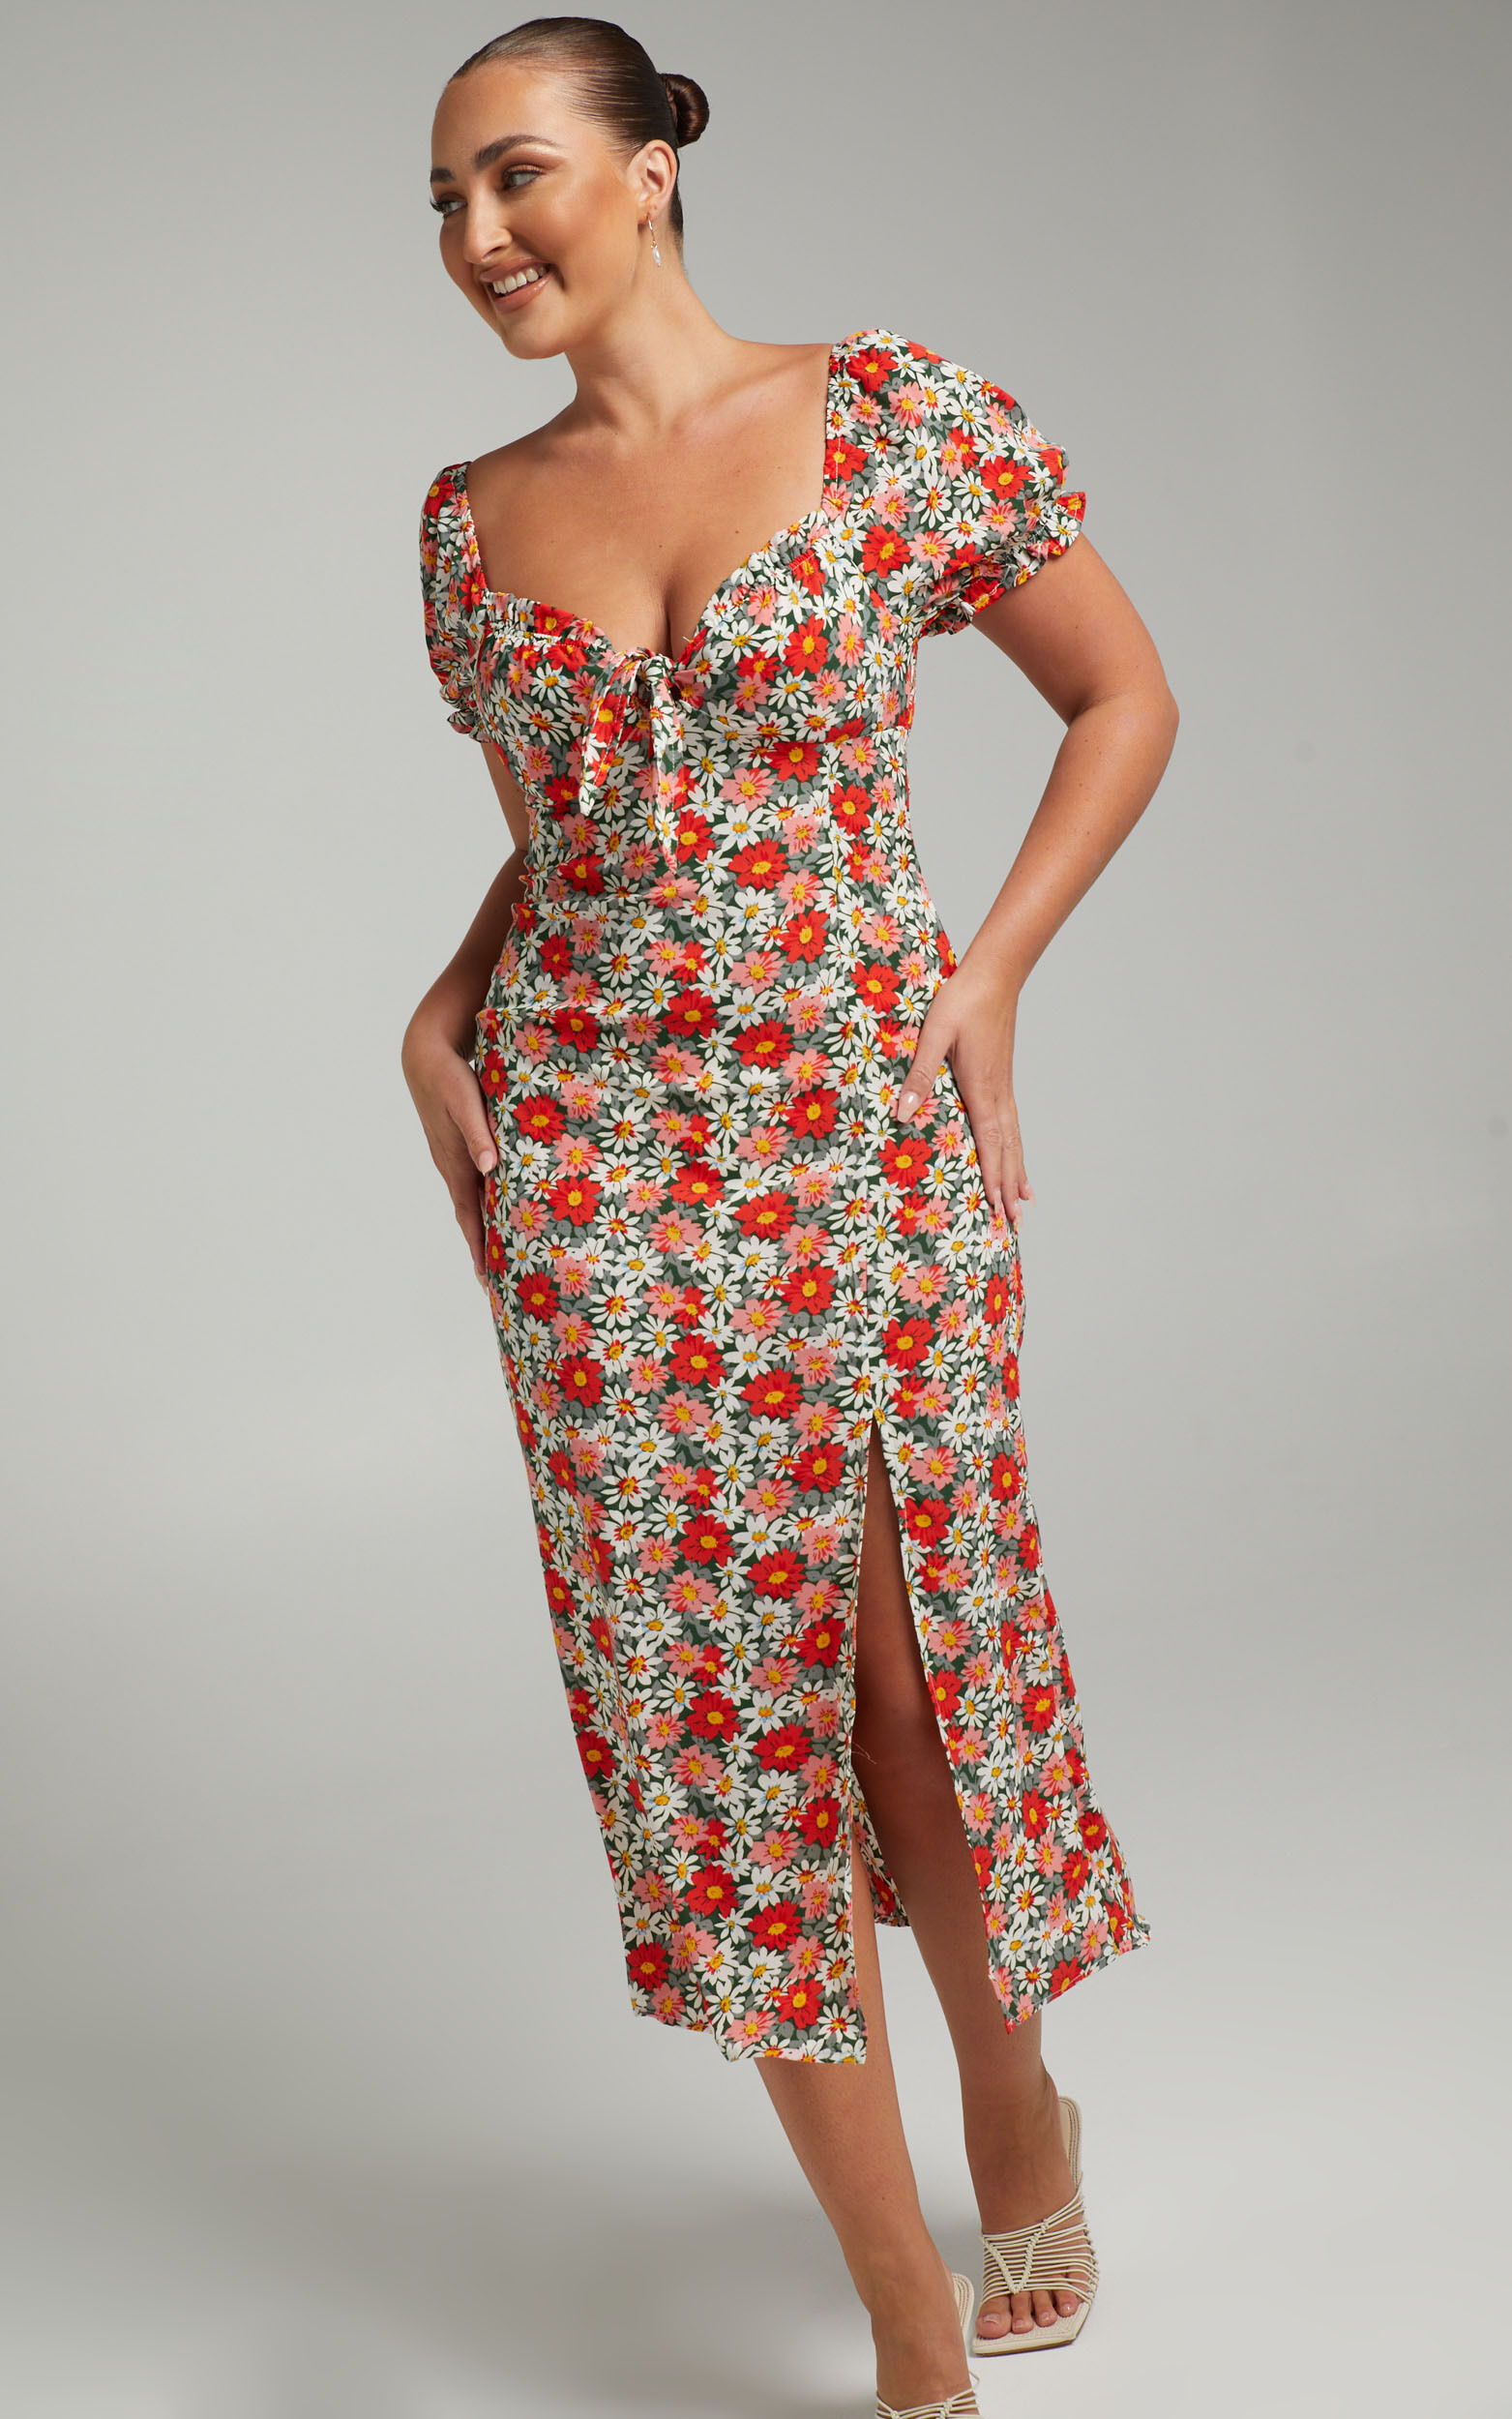 Patty Midi Dress with Front Bust Tie in Navy Floral - 04, NVY1, super-hi-res image number null